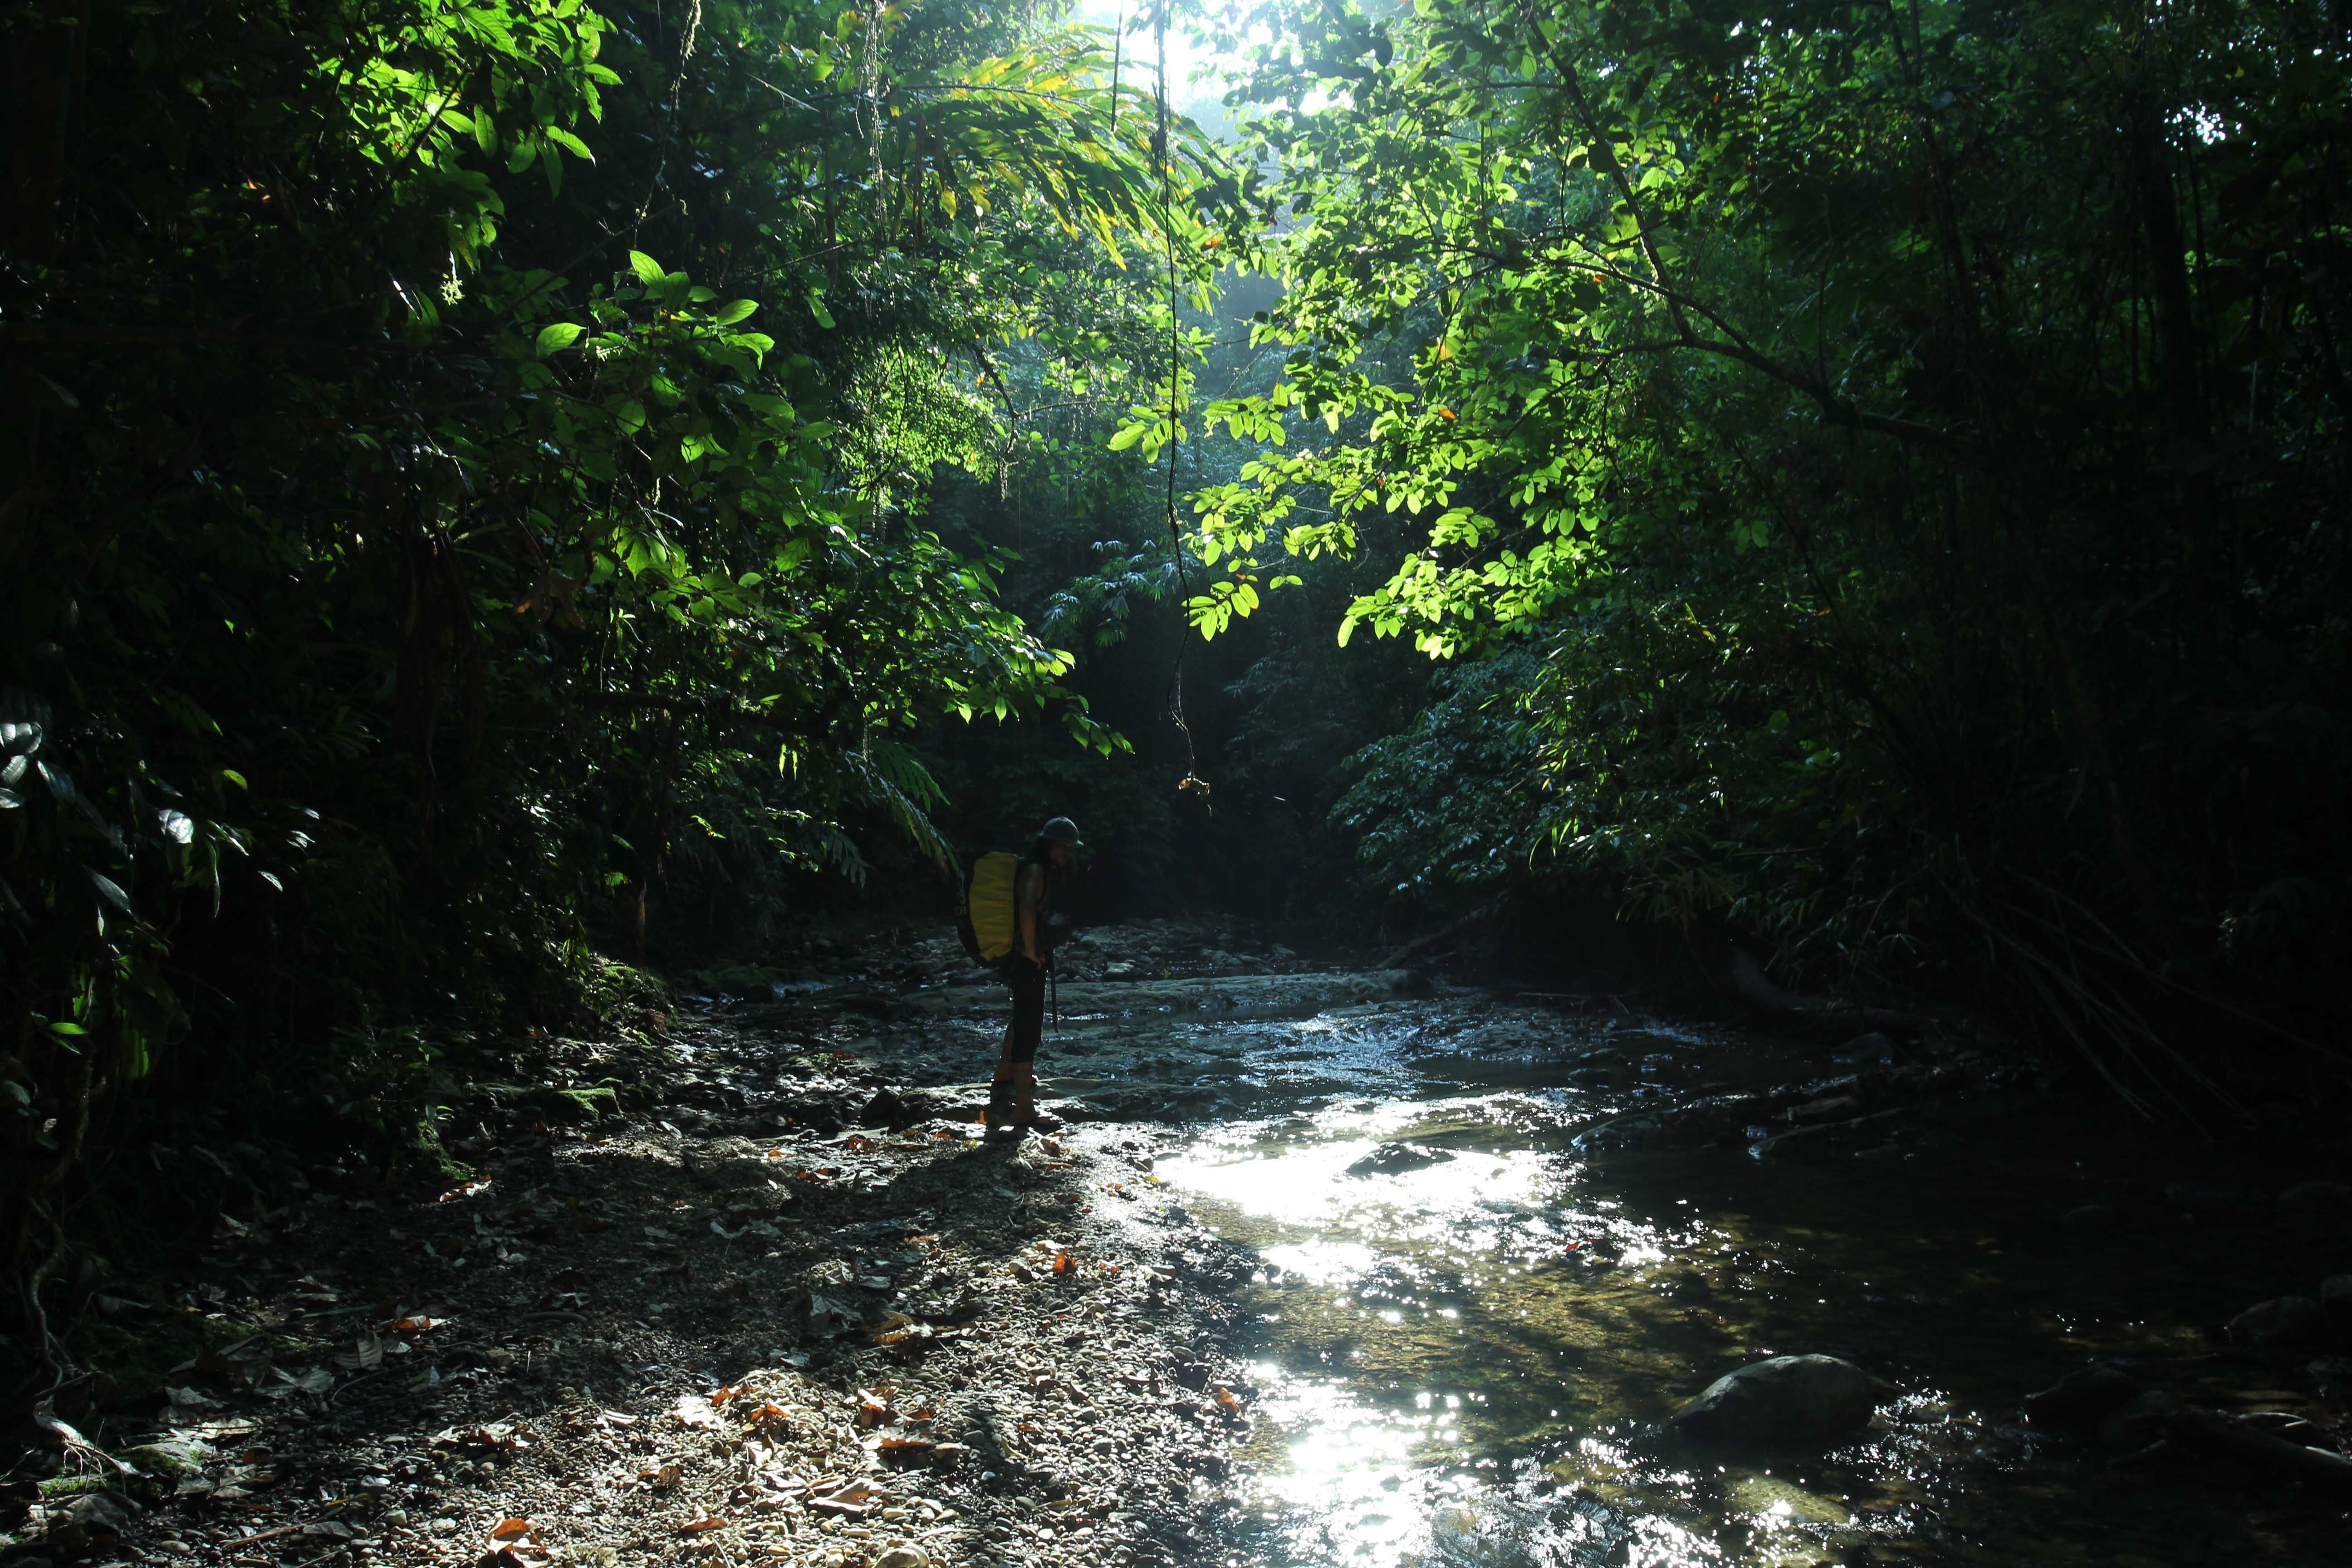 Siberut National Park. Image by Febrianti. Indonesia, 2020.